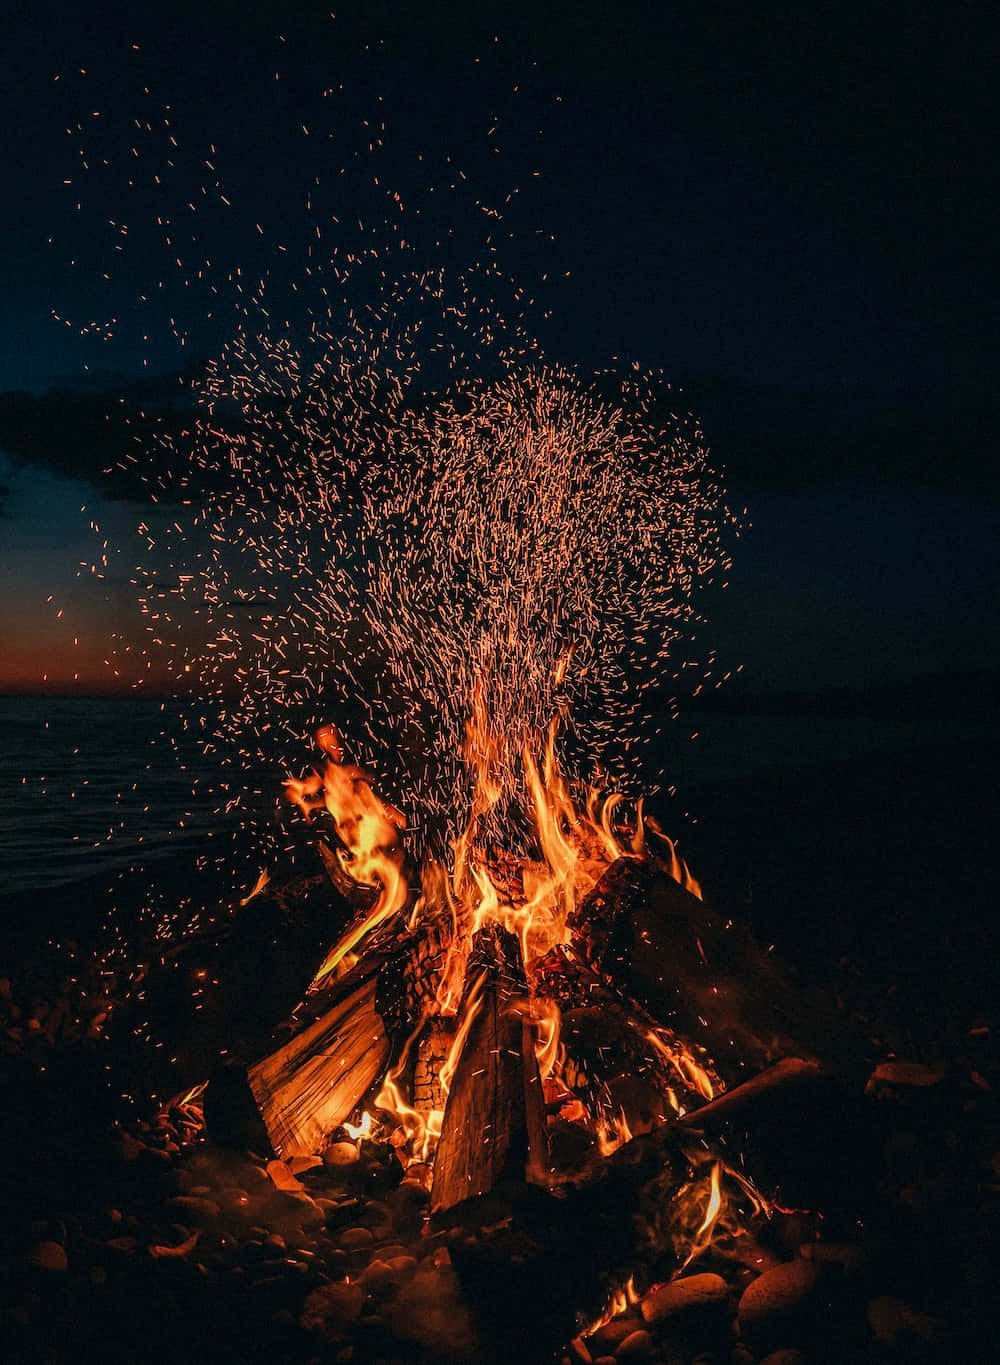 Unforgettable memories are made around a campfire with friends.